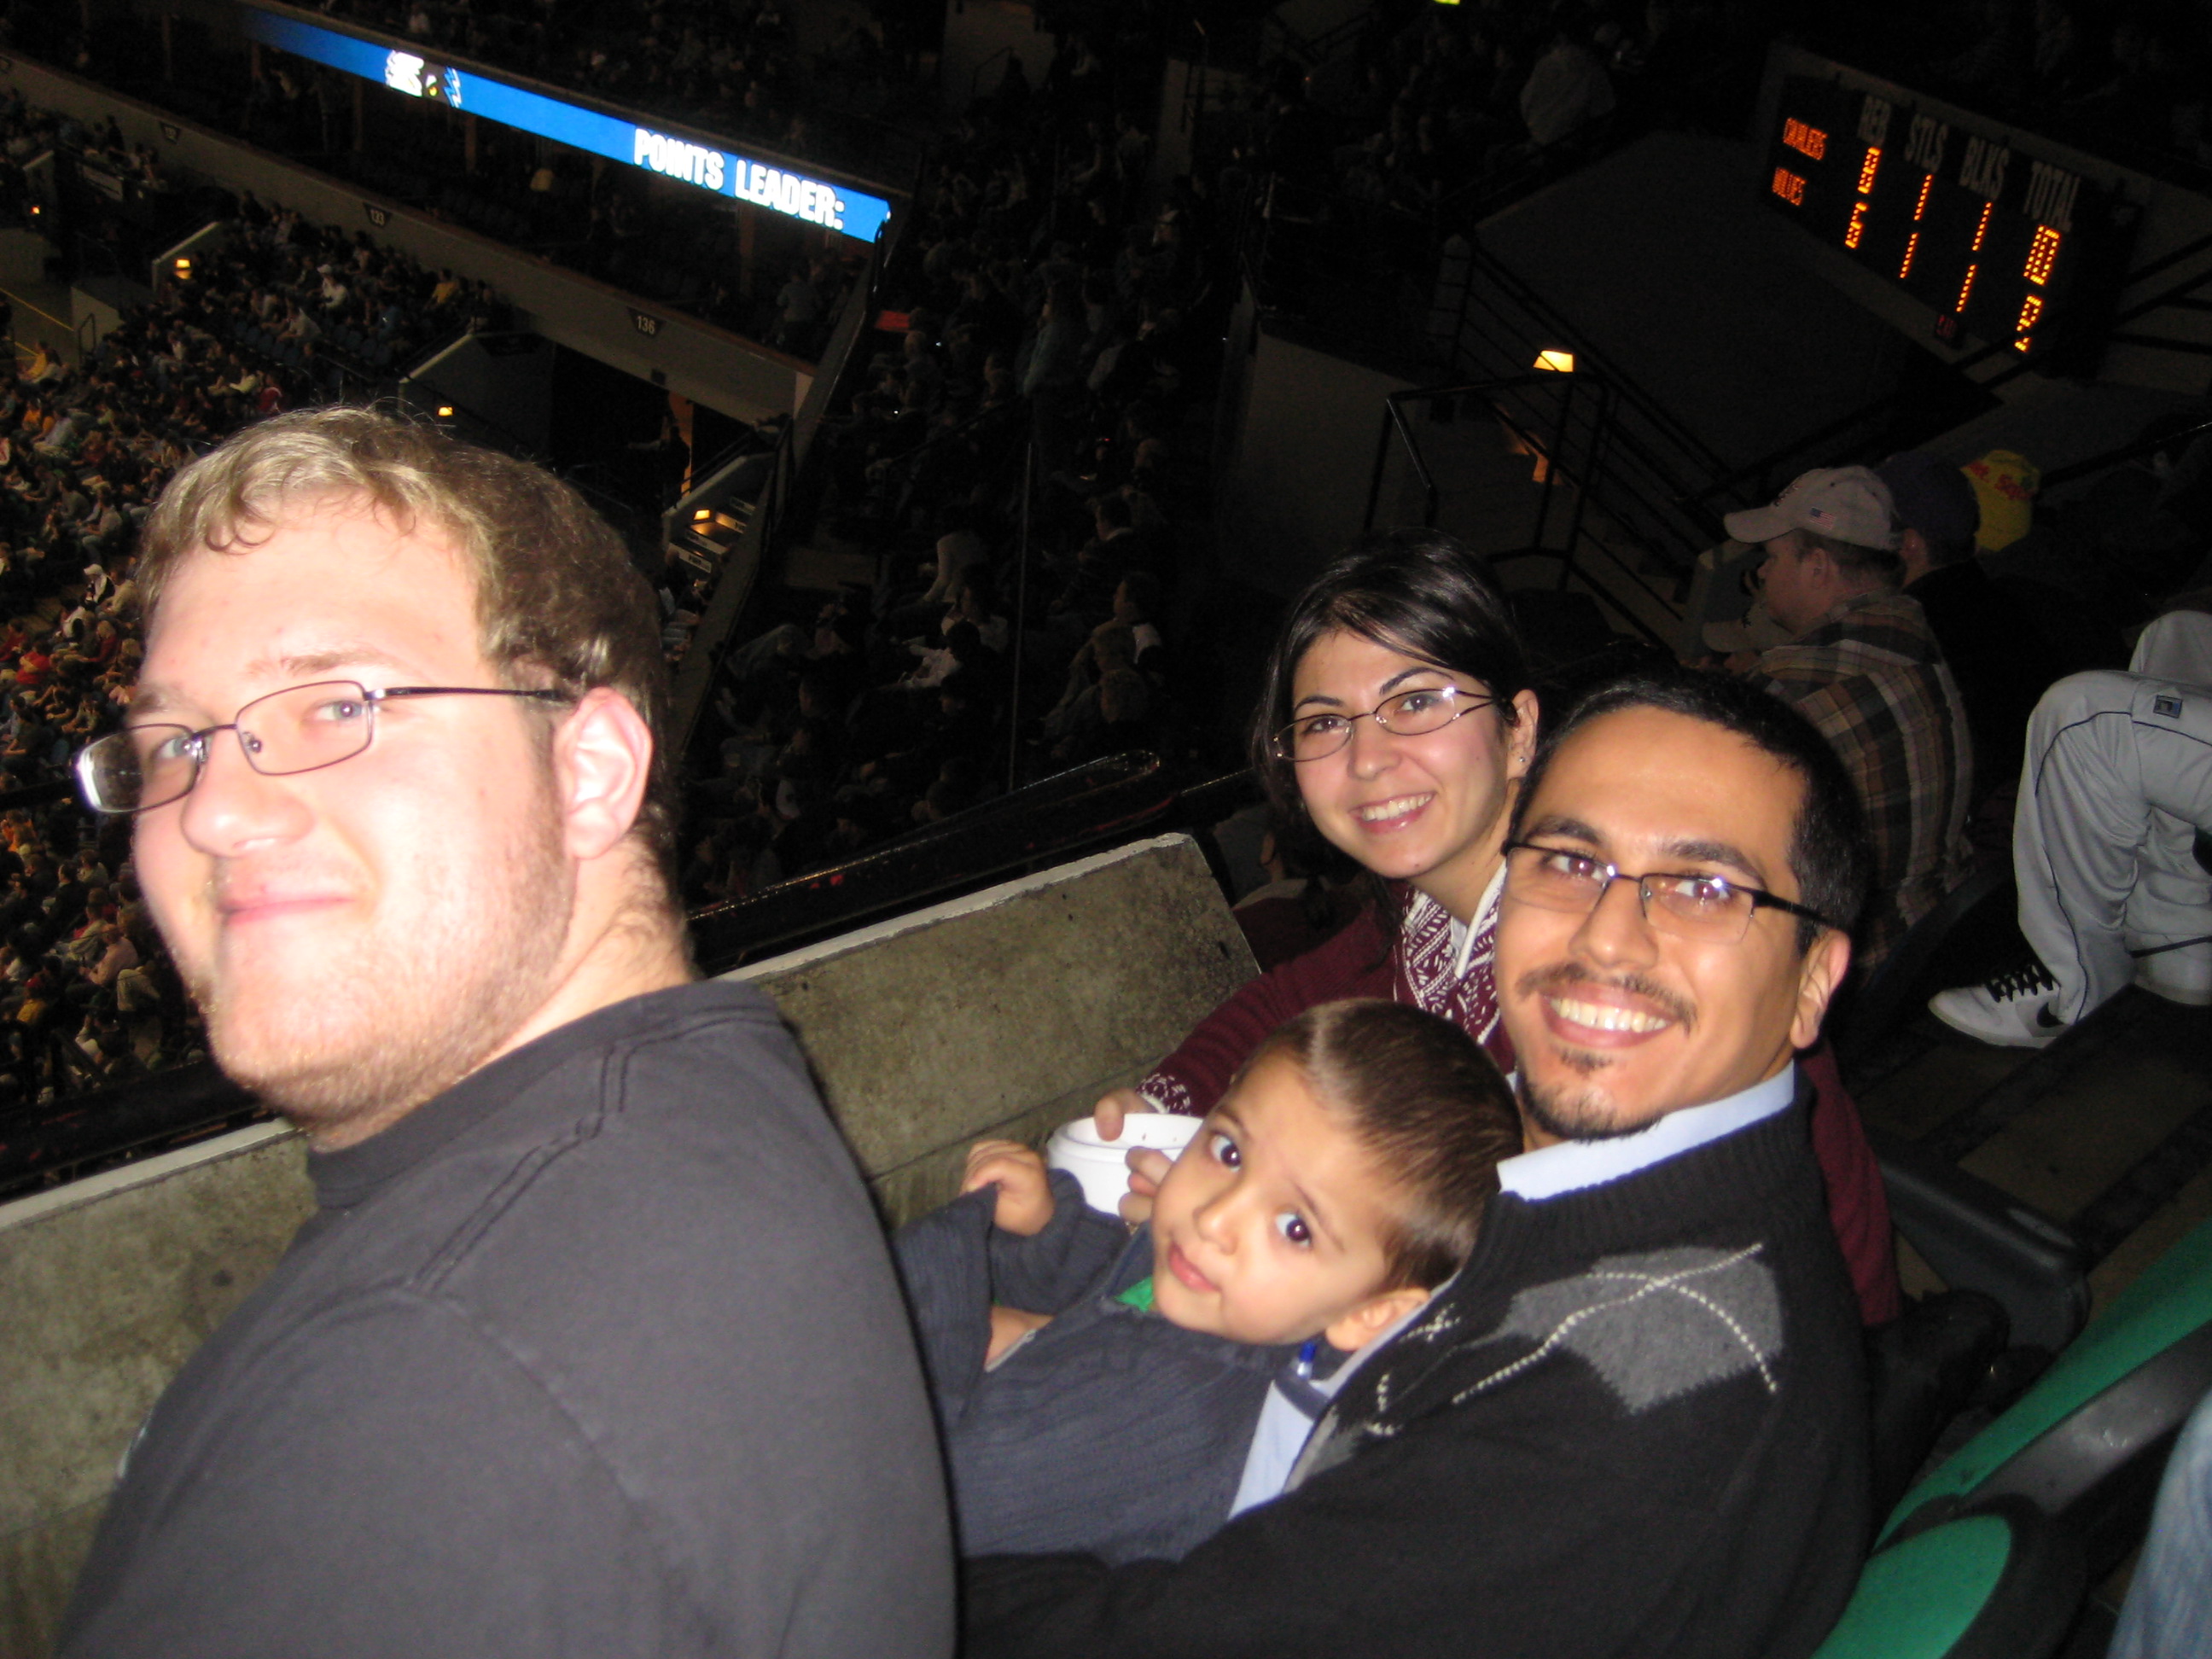 At the Timberwolves vs. Cavaliers games